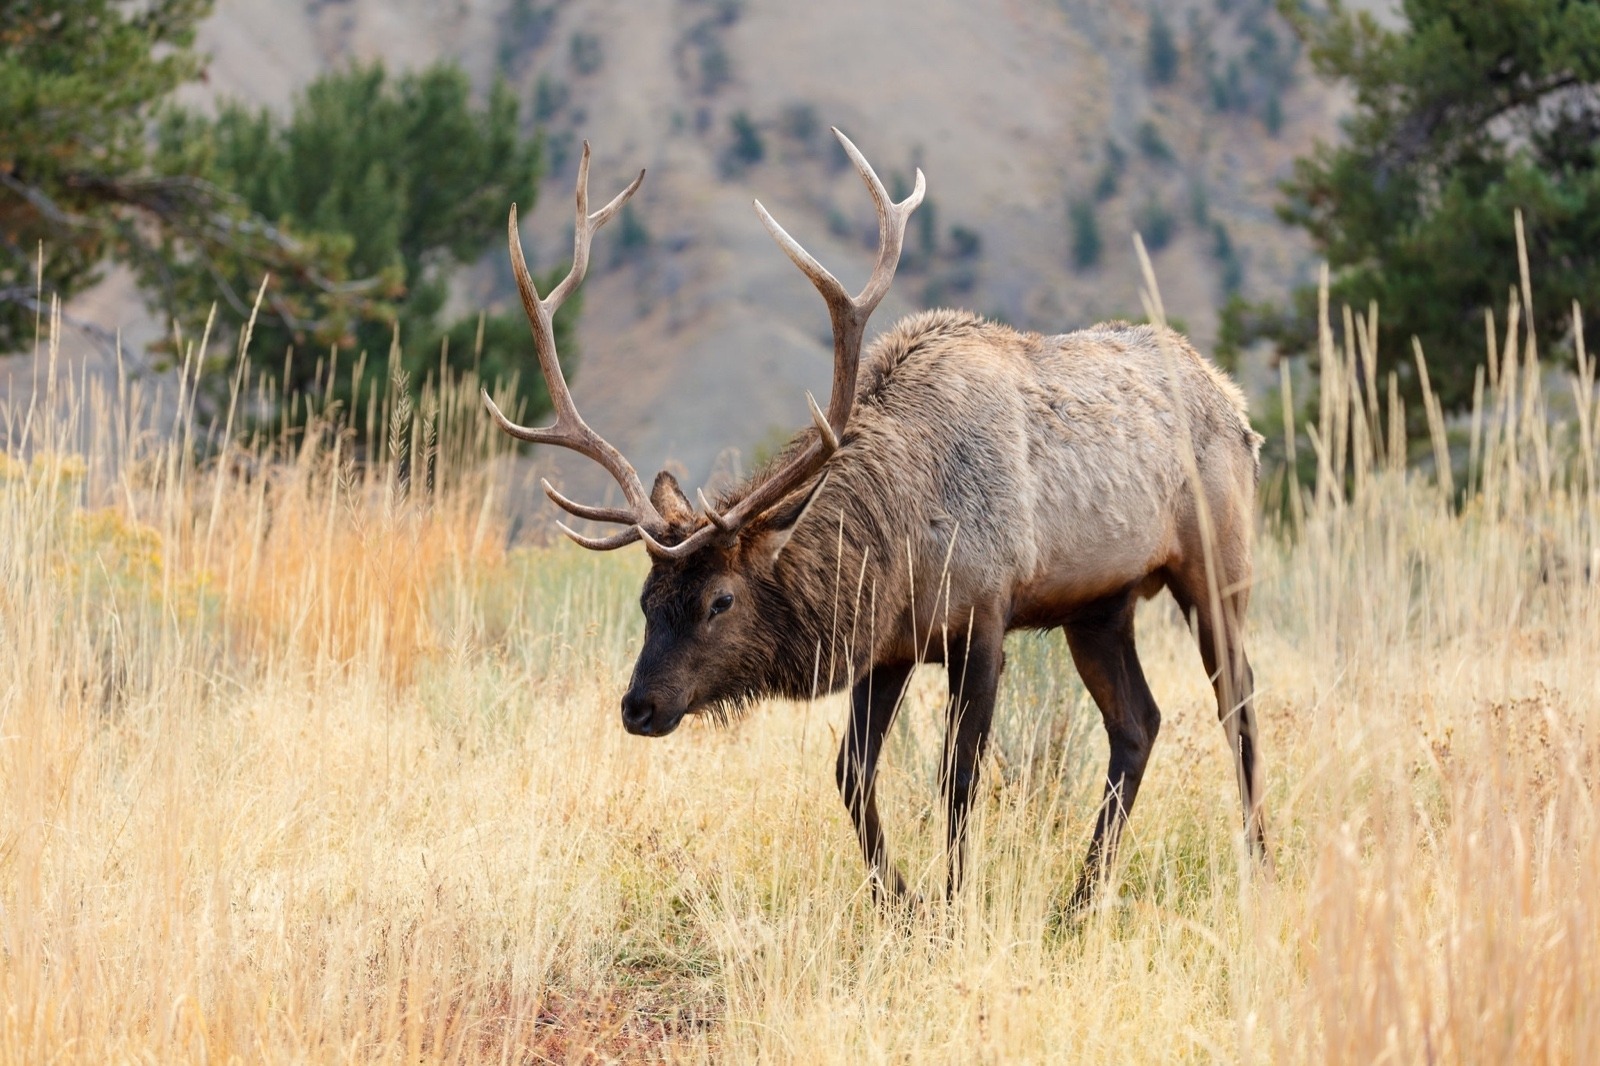 A bull elk in Yellowstone, its survival dependent upon having access to public and private lands. Photo courtesy Jacob W. Frank/NPS